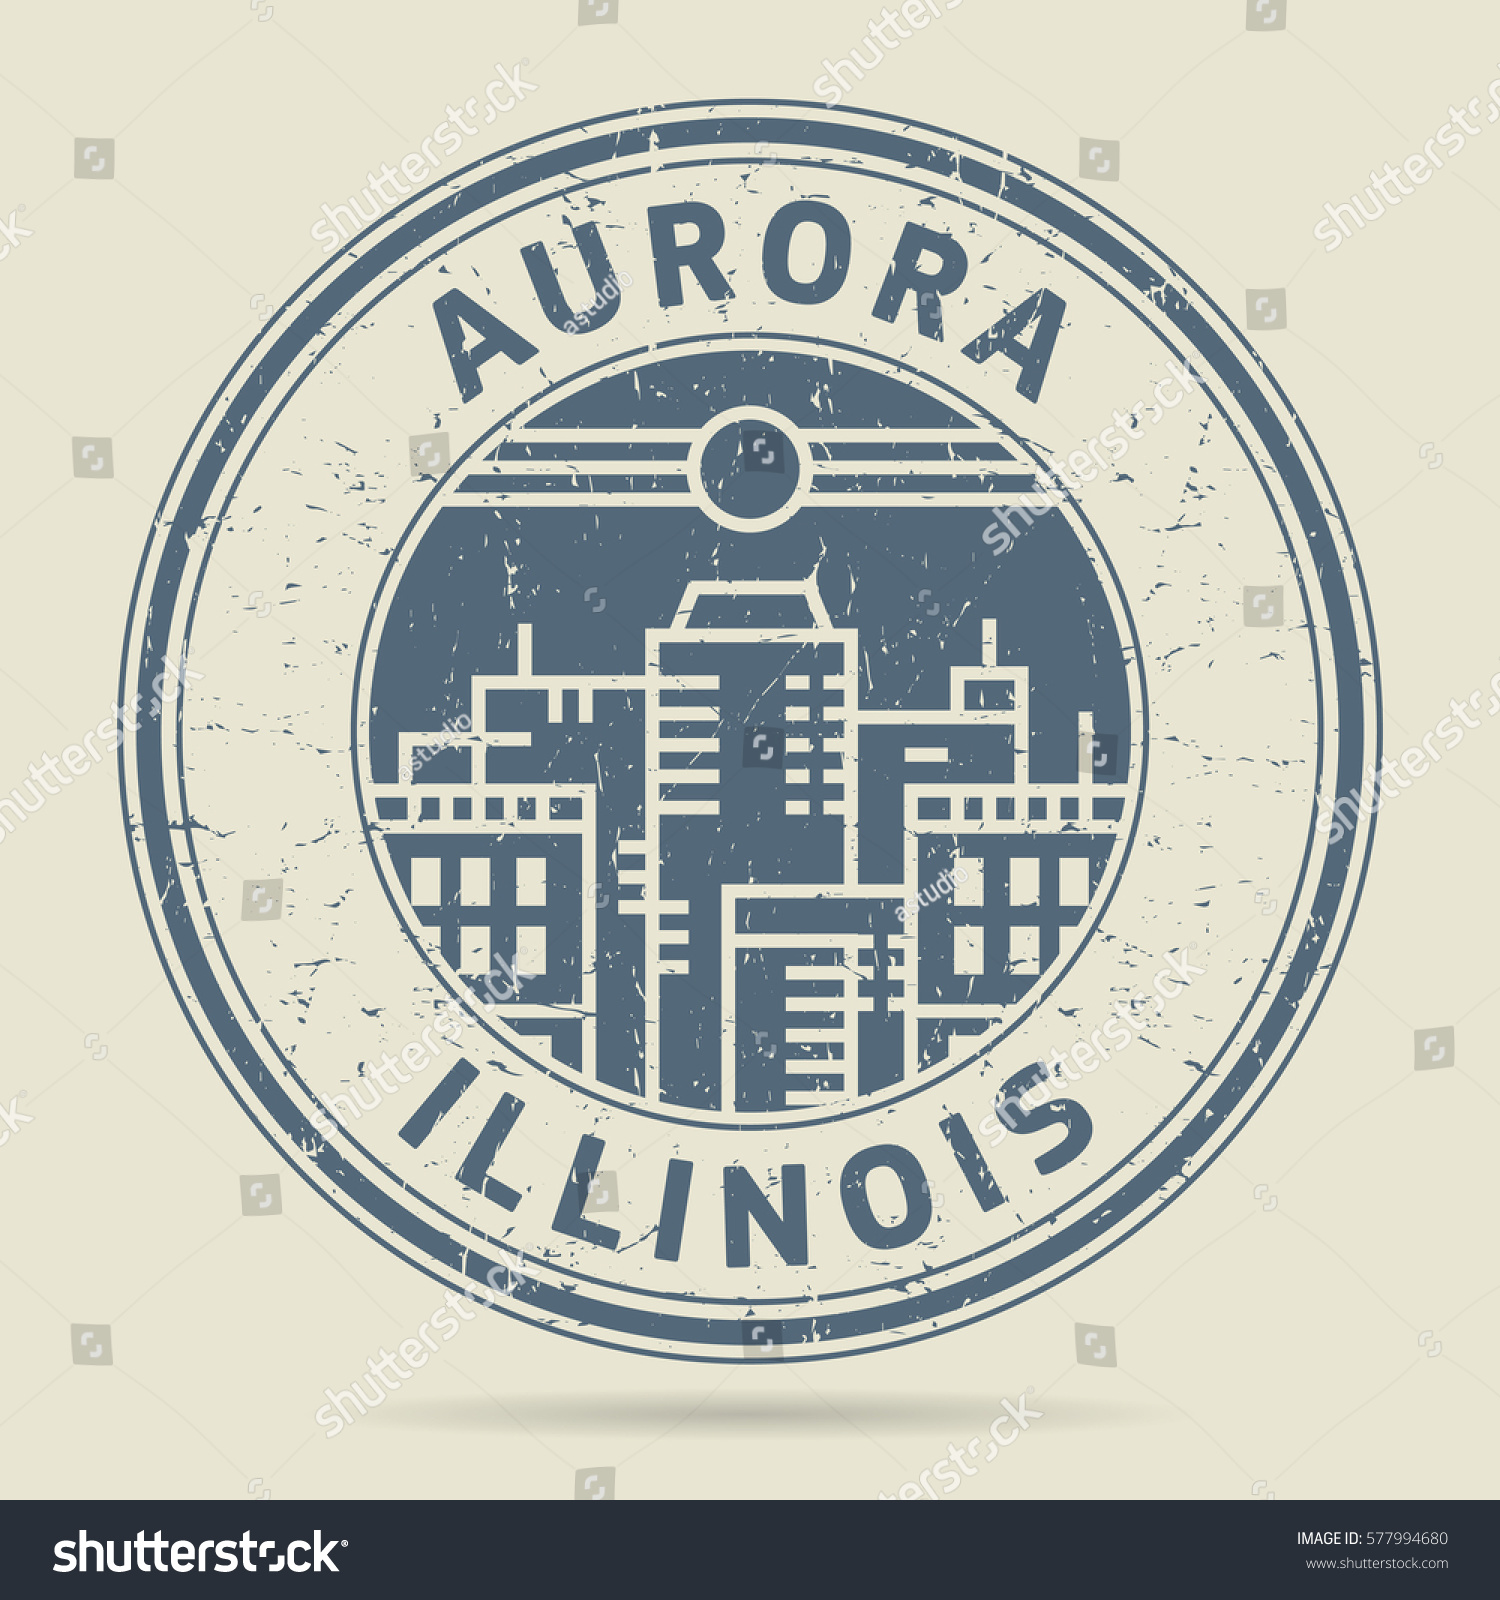 SVG of Grunge rubber stamp or label with text Aurora, Illinois written inside, vector illustration svg